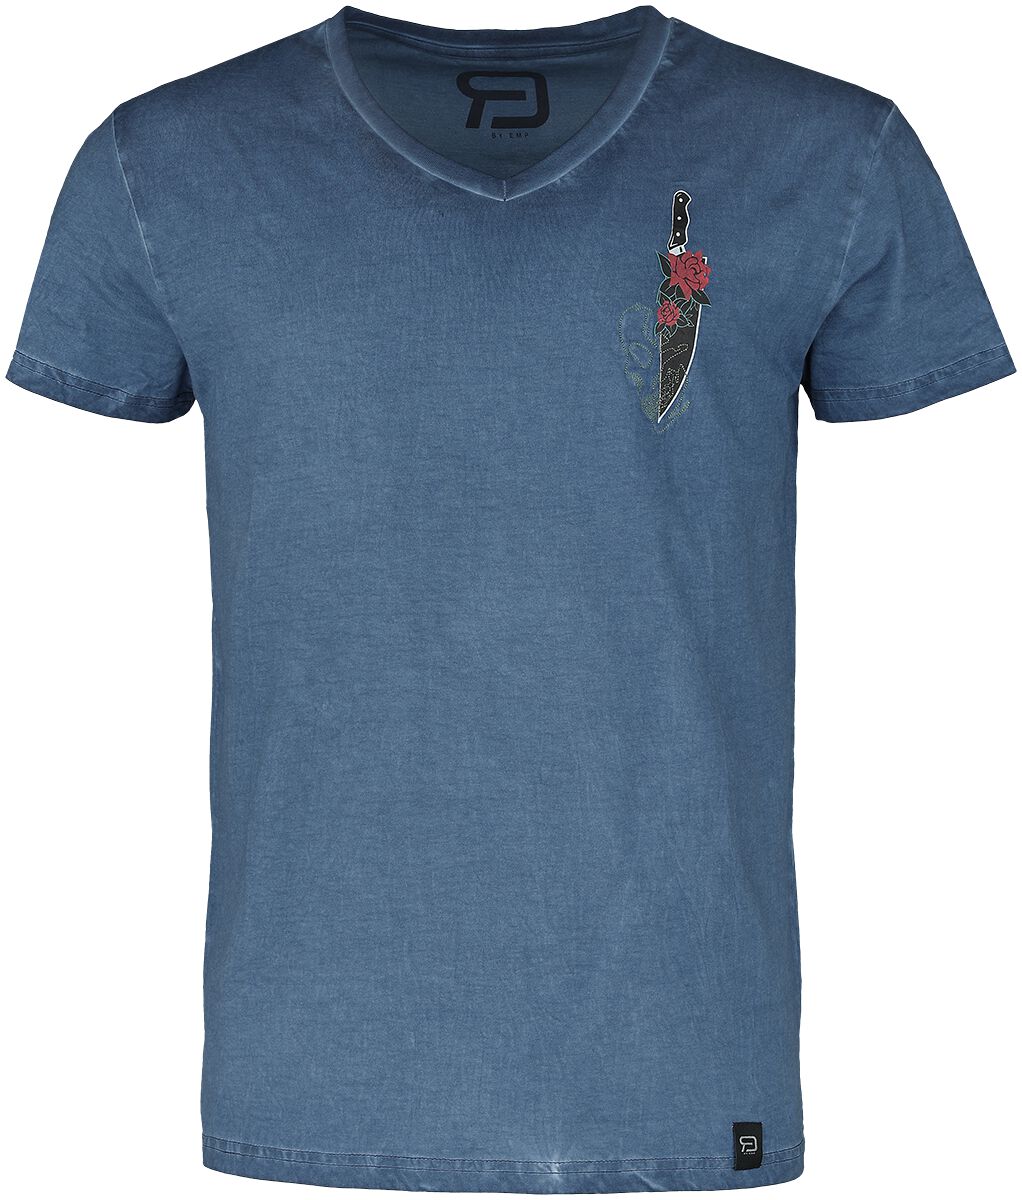 Image of T-Shirt di RED by EMP - T-shirt with dagger and embroidery detail - S a L - Uomo - blu